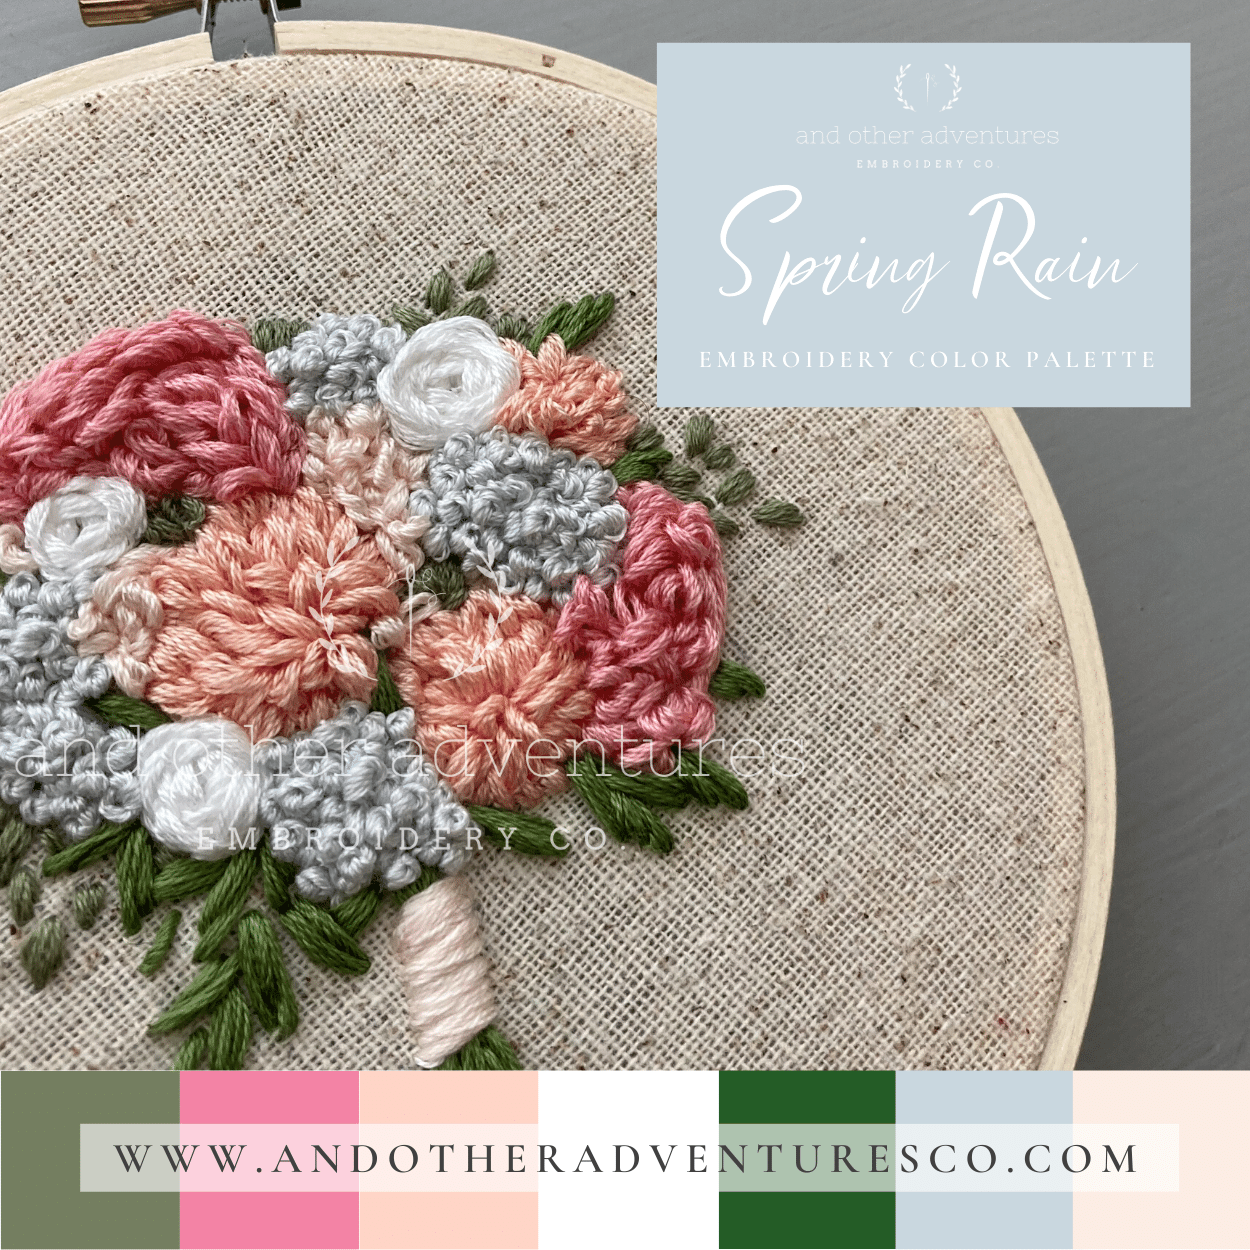 Spring Rain Hand Embroidery Color Palette by And Other Adventures Embroidery Co